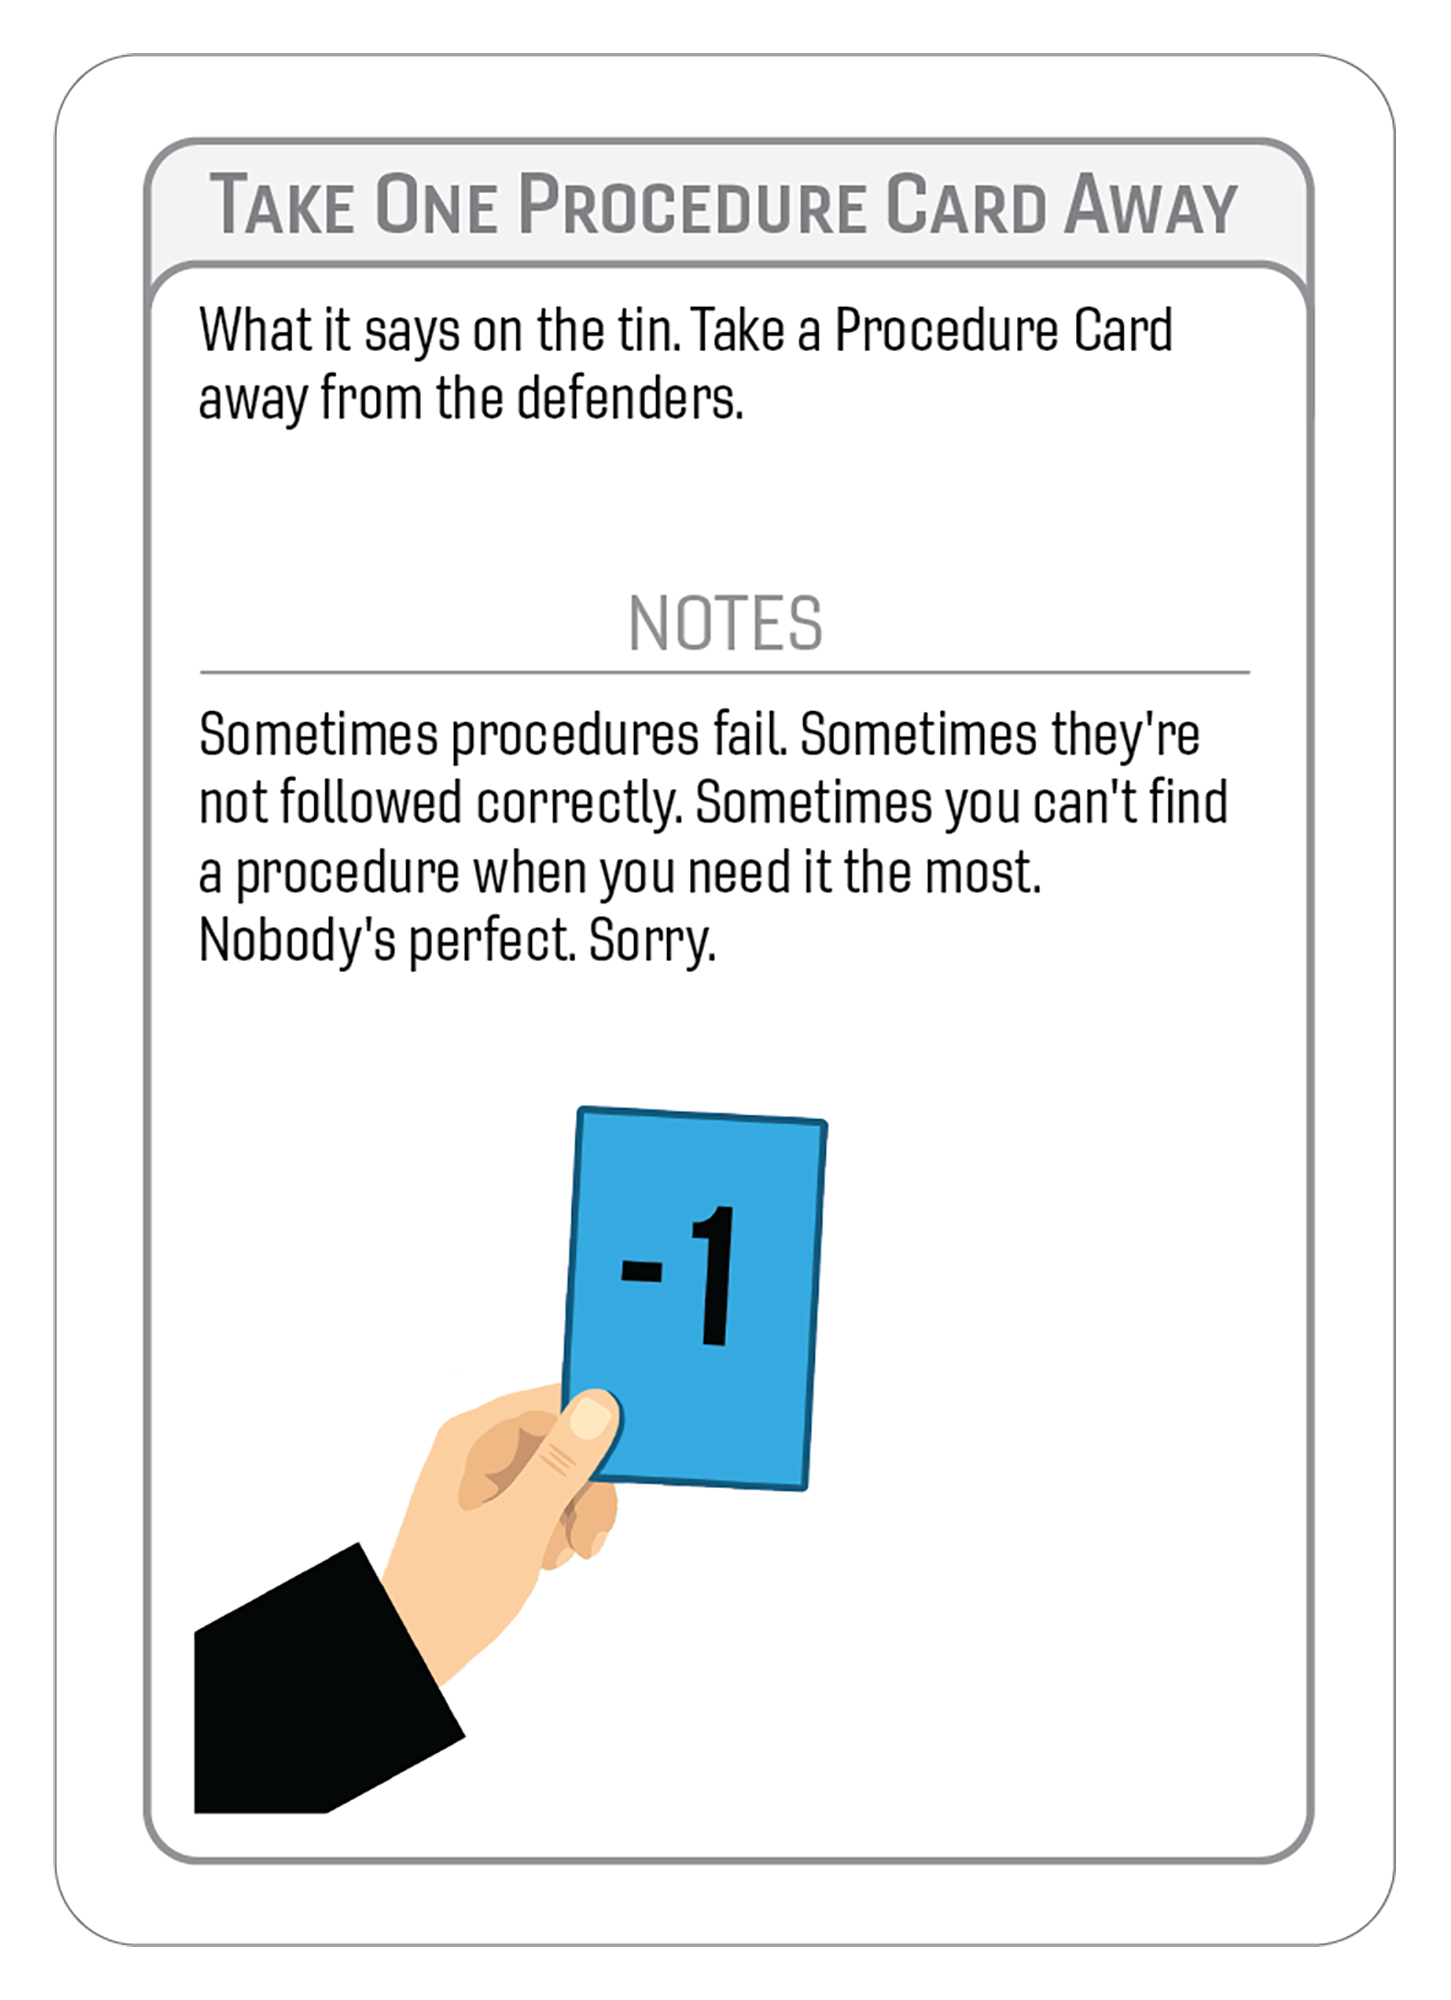 Take One Procedure Card away from the Defenders.-47